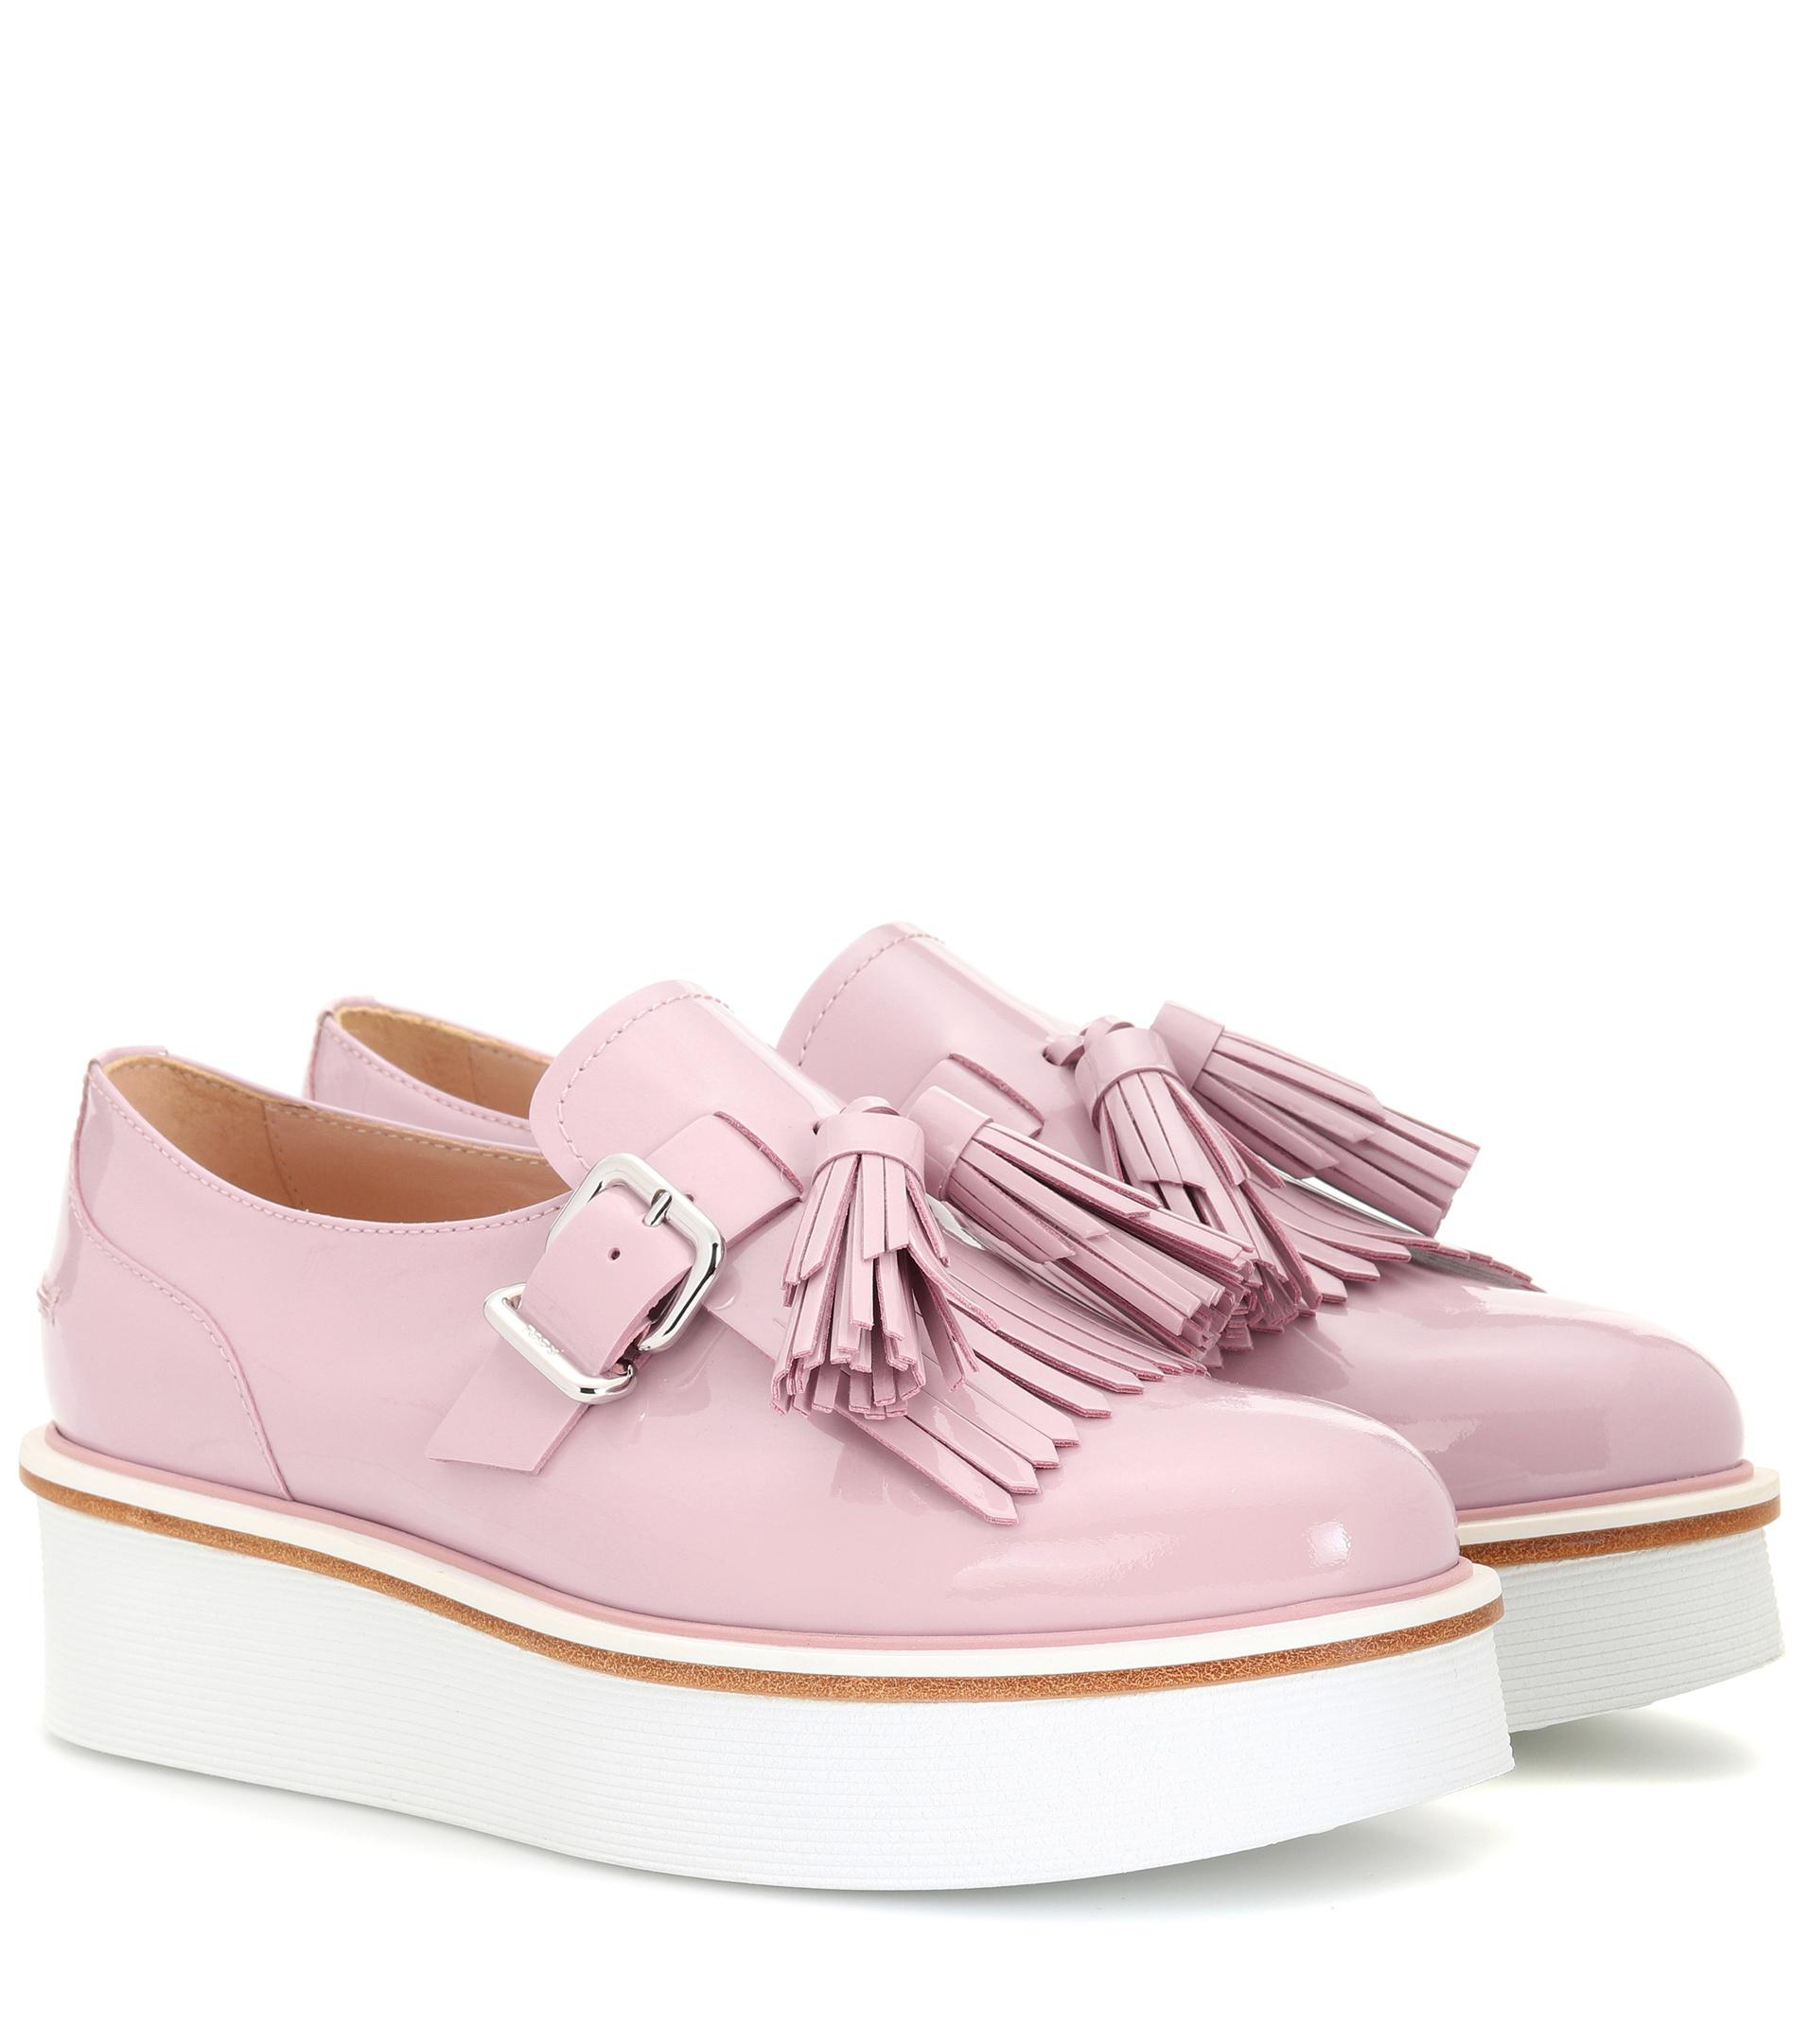 Lyst - Tod'S Leather Platform Loafers in Pink